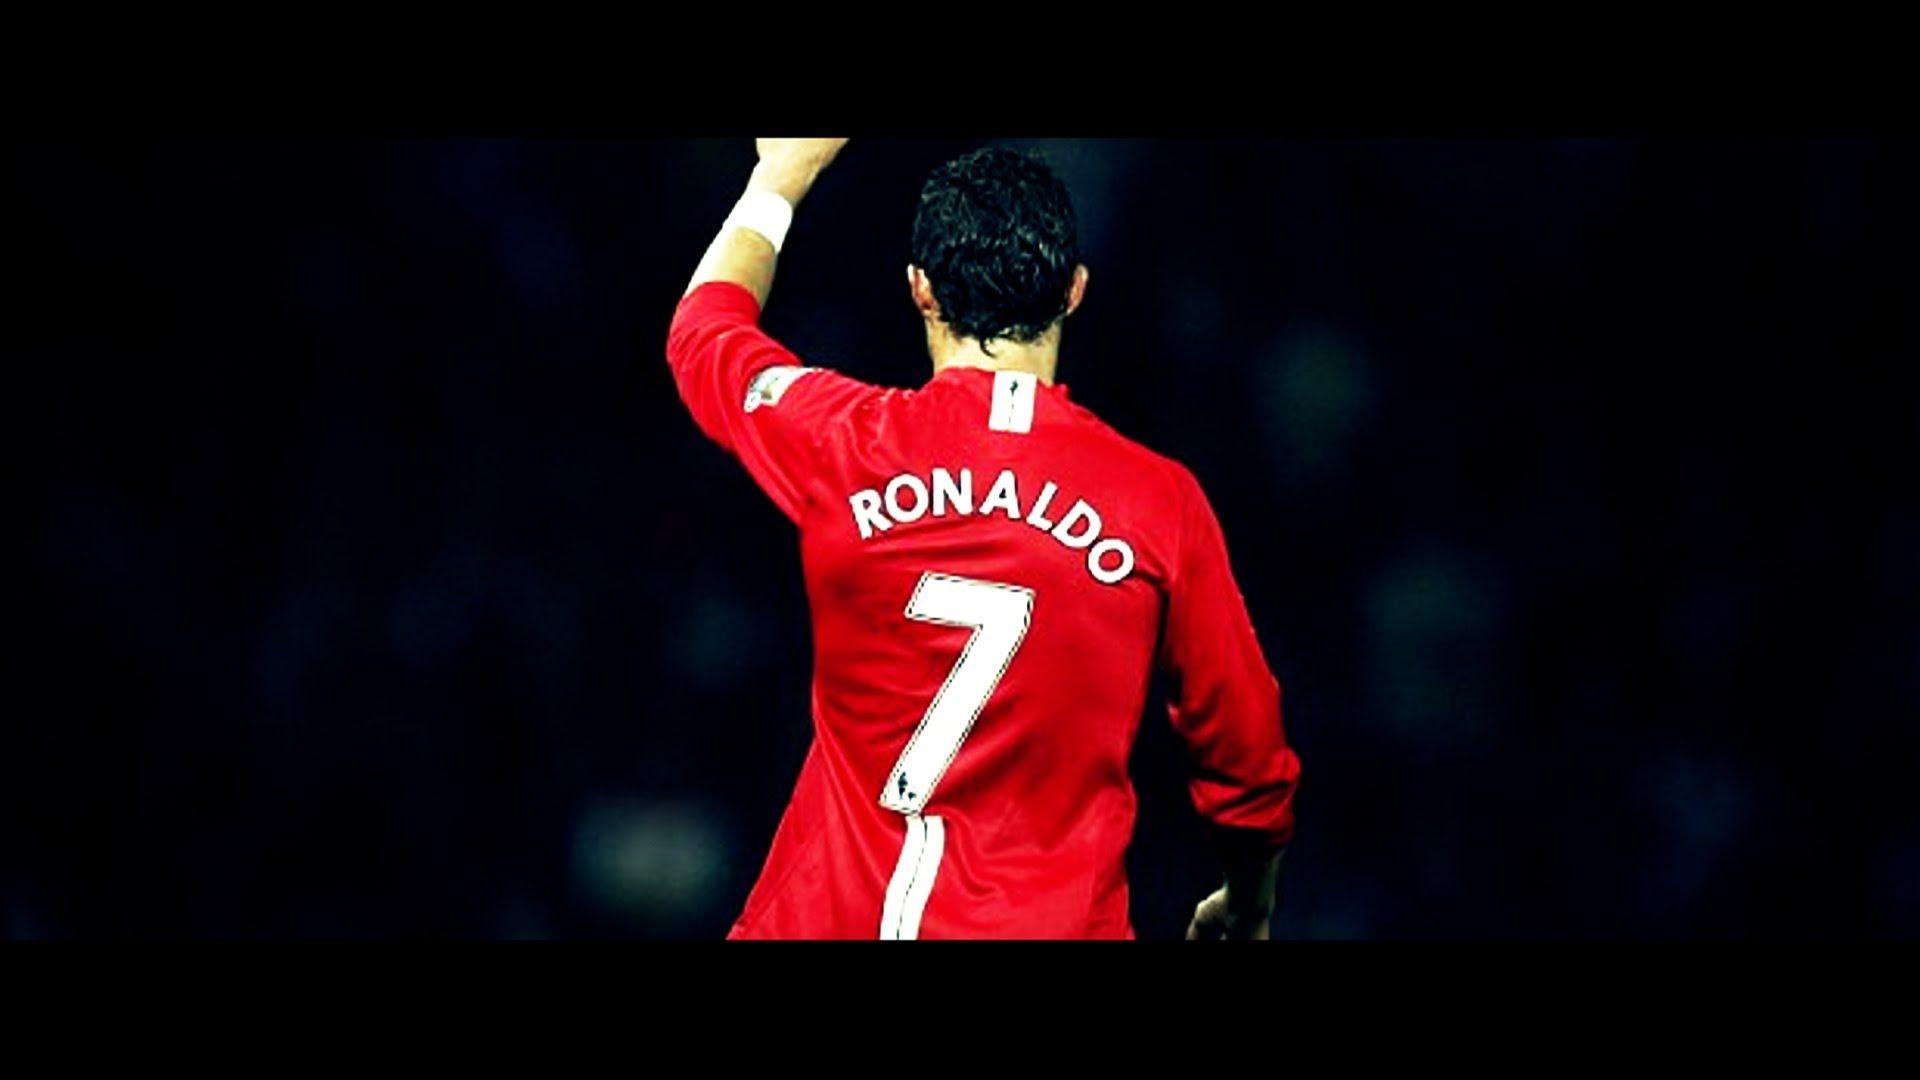 Manchester United Ronaldo From Back Wallpaper: Players, Teams